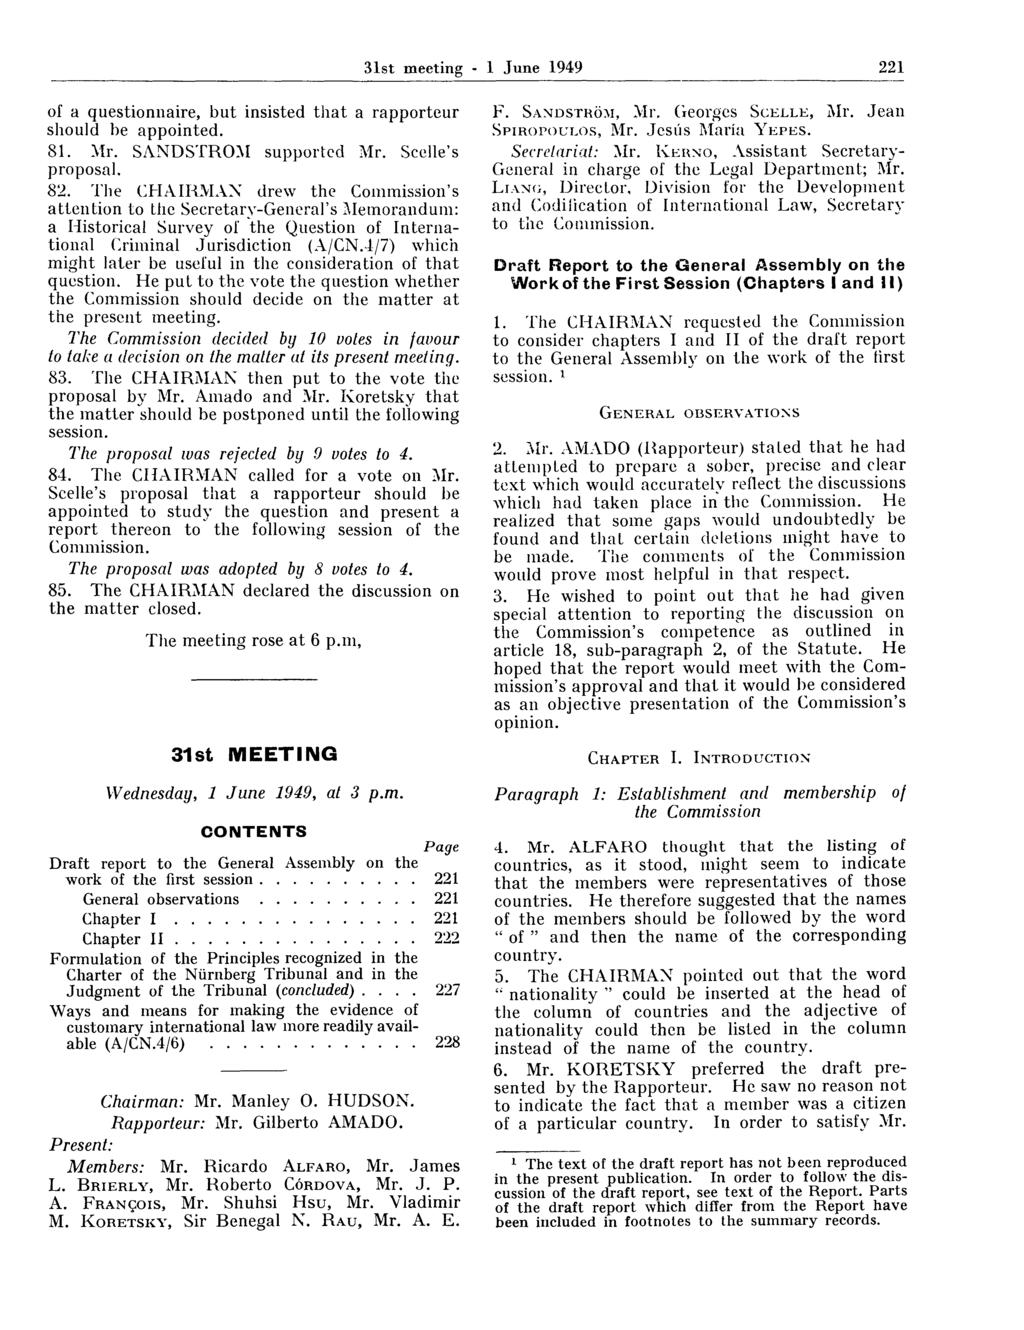 31st meeting - 1 June 1949 221 of a questionnaire, but insisted that a rapporteur should be appointed. 81. Mr. SANDSTROM supported Mr. Scelle's proposal. 82.